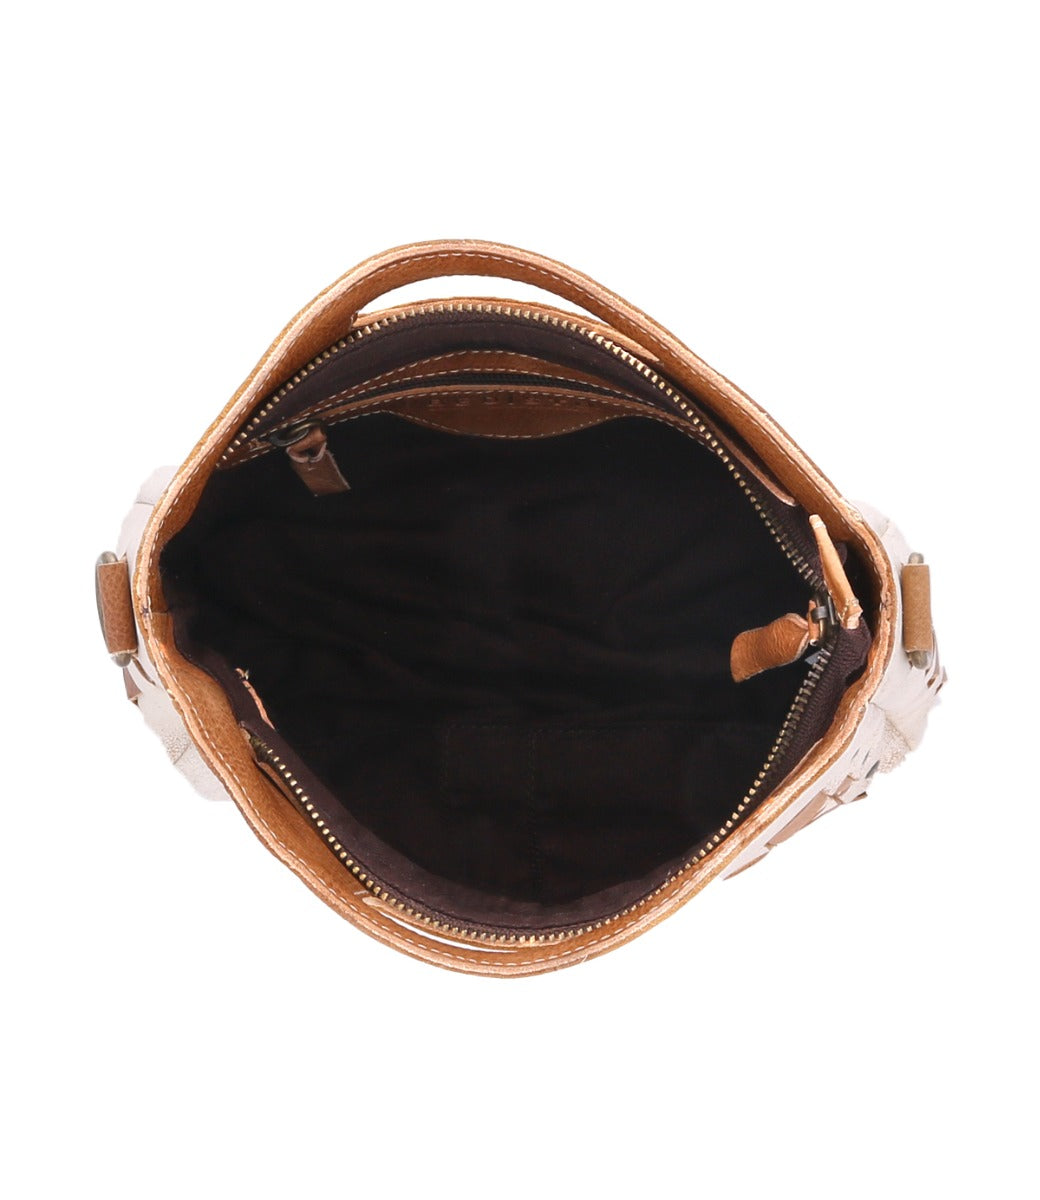 The inside of a Keiki brown leather bag by Bed Stu.